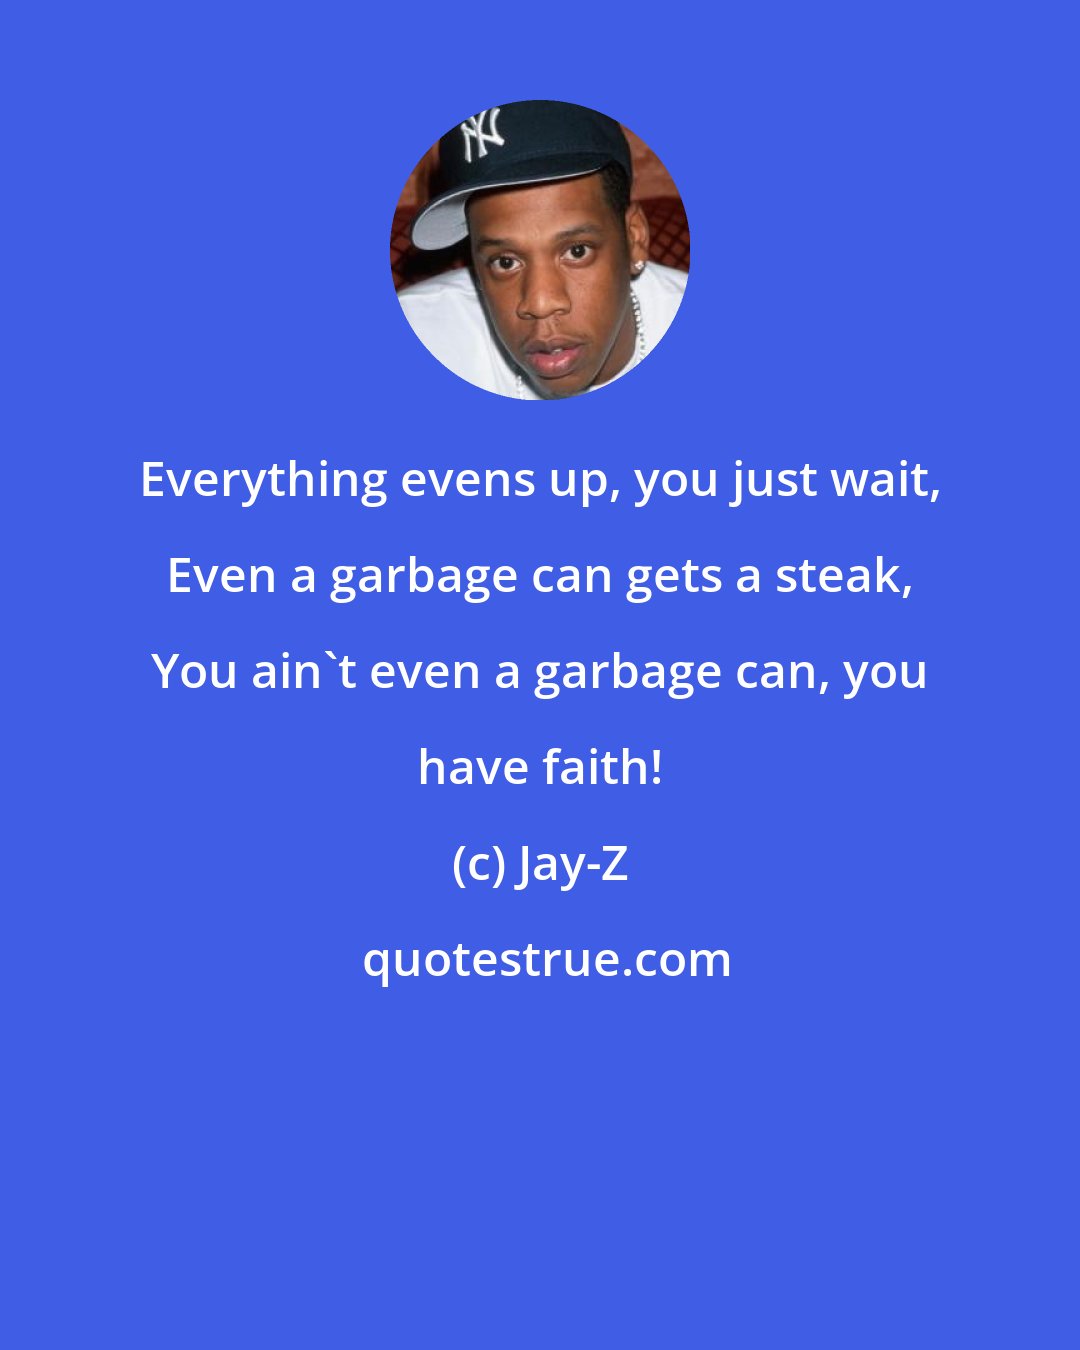 Jay-Z: Everything evens up, you just wait, Even a garbage can gets a steak, You ain't even a garbage can, you have faith!